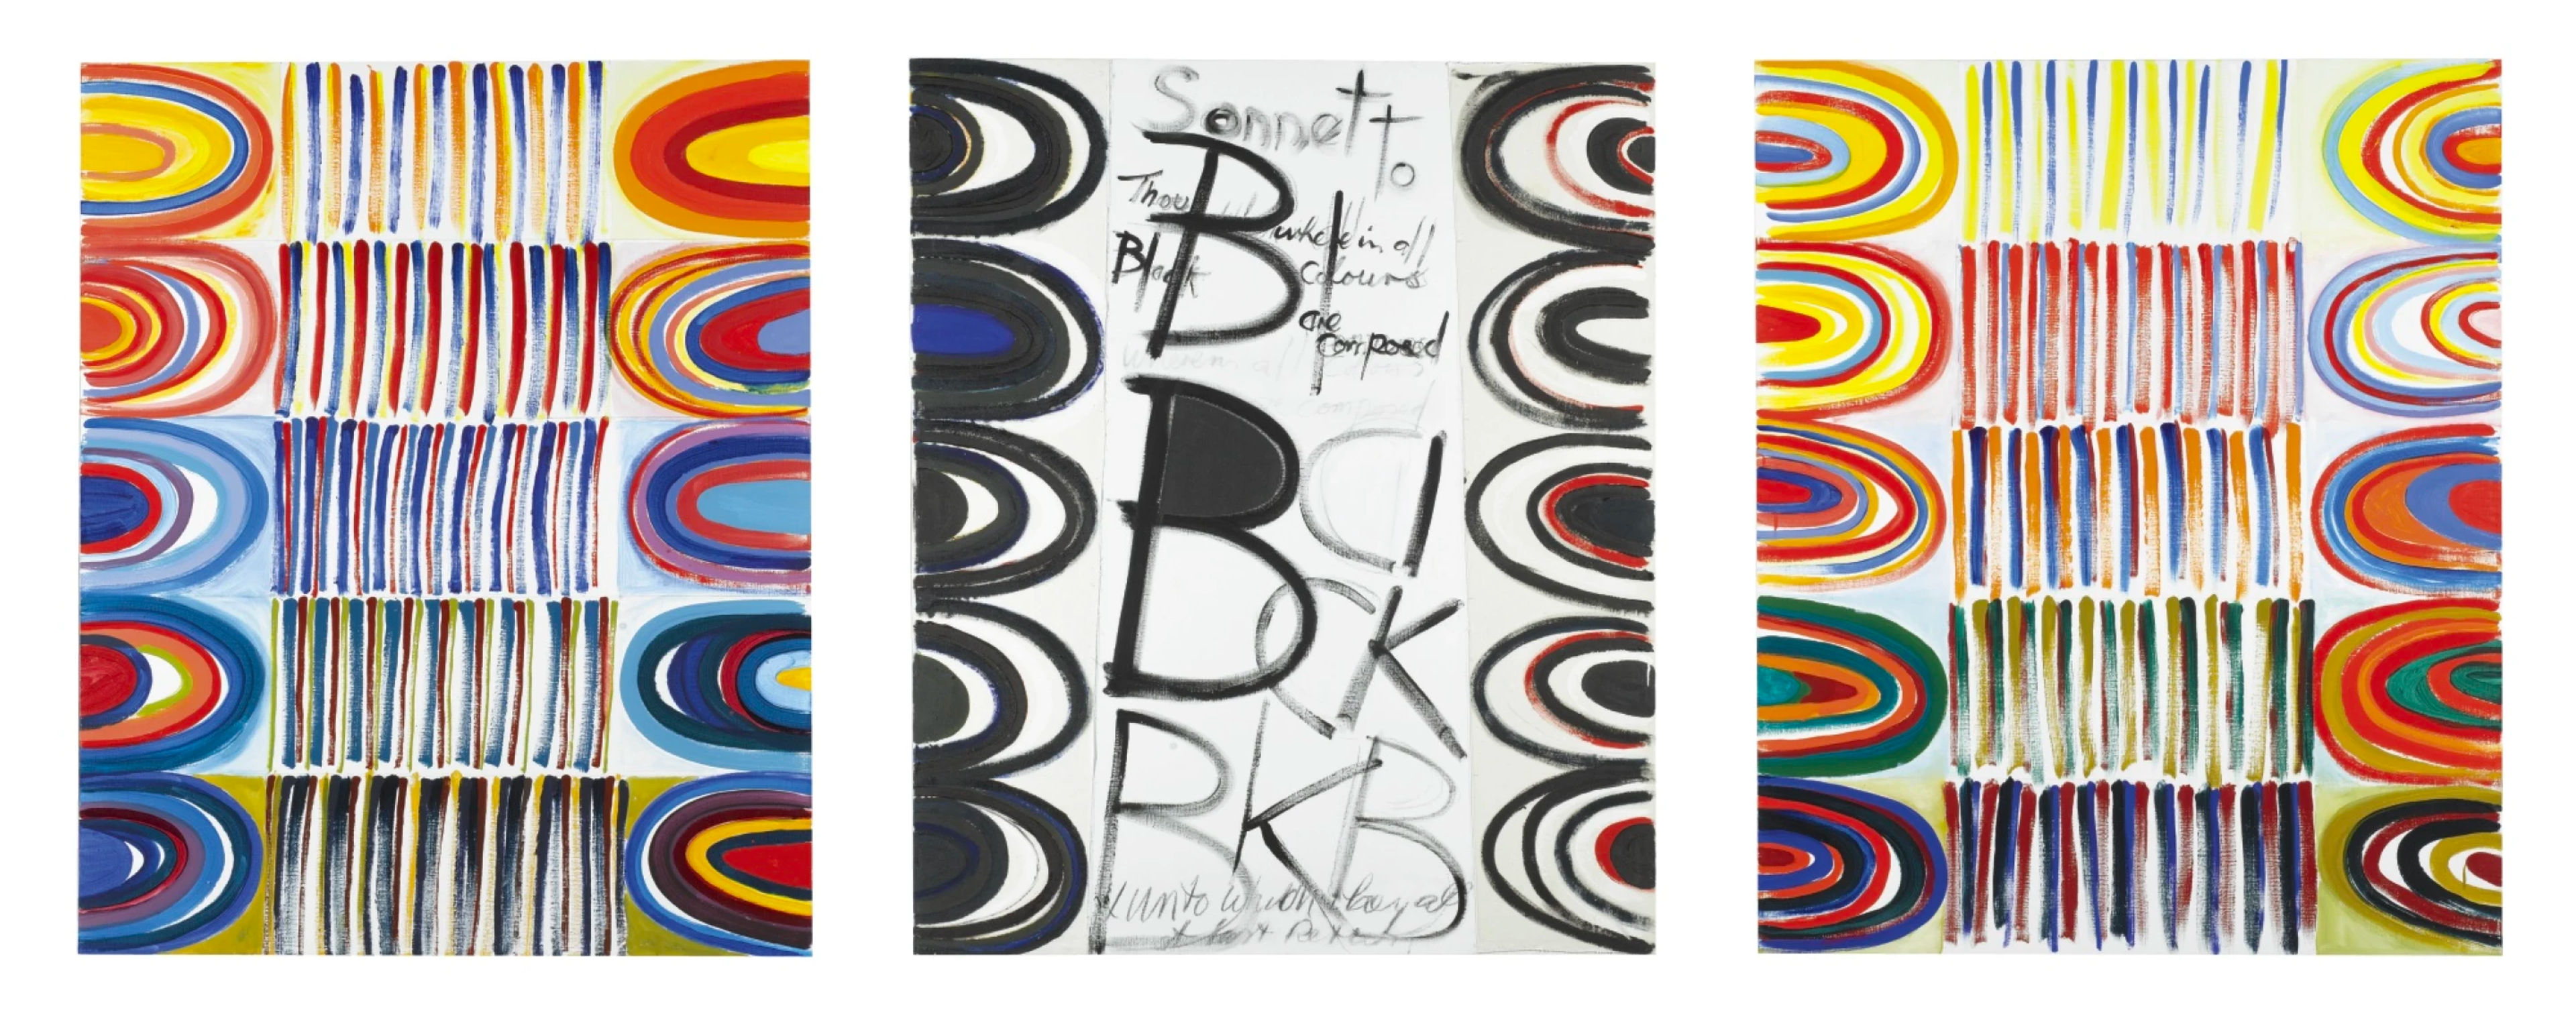 A colourful triptych artwork. The two outer pieces are composed of repeated vertical lines stacked in five rows, accompanied by colourful semicircles on each side. In the middle canvas, semicircles frame both edges, while various letters spelling out the word "black" are repeated throughout the centre.